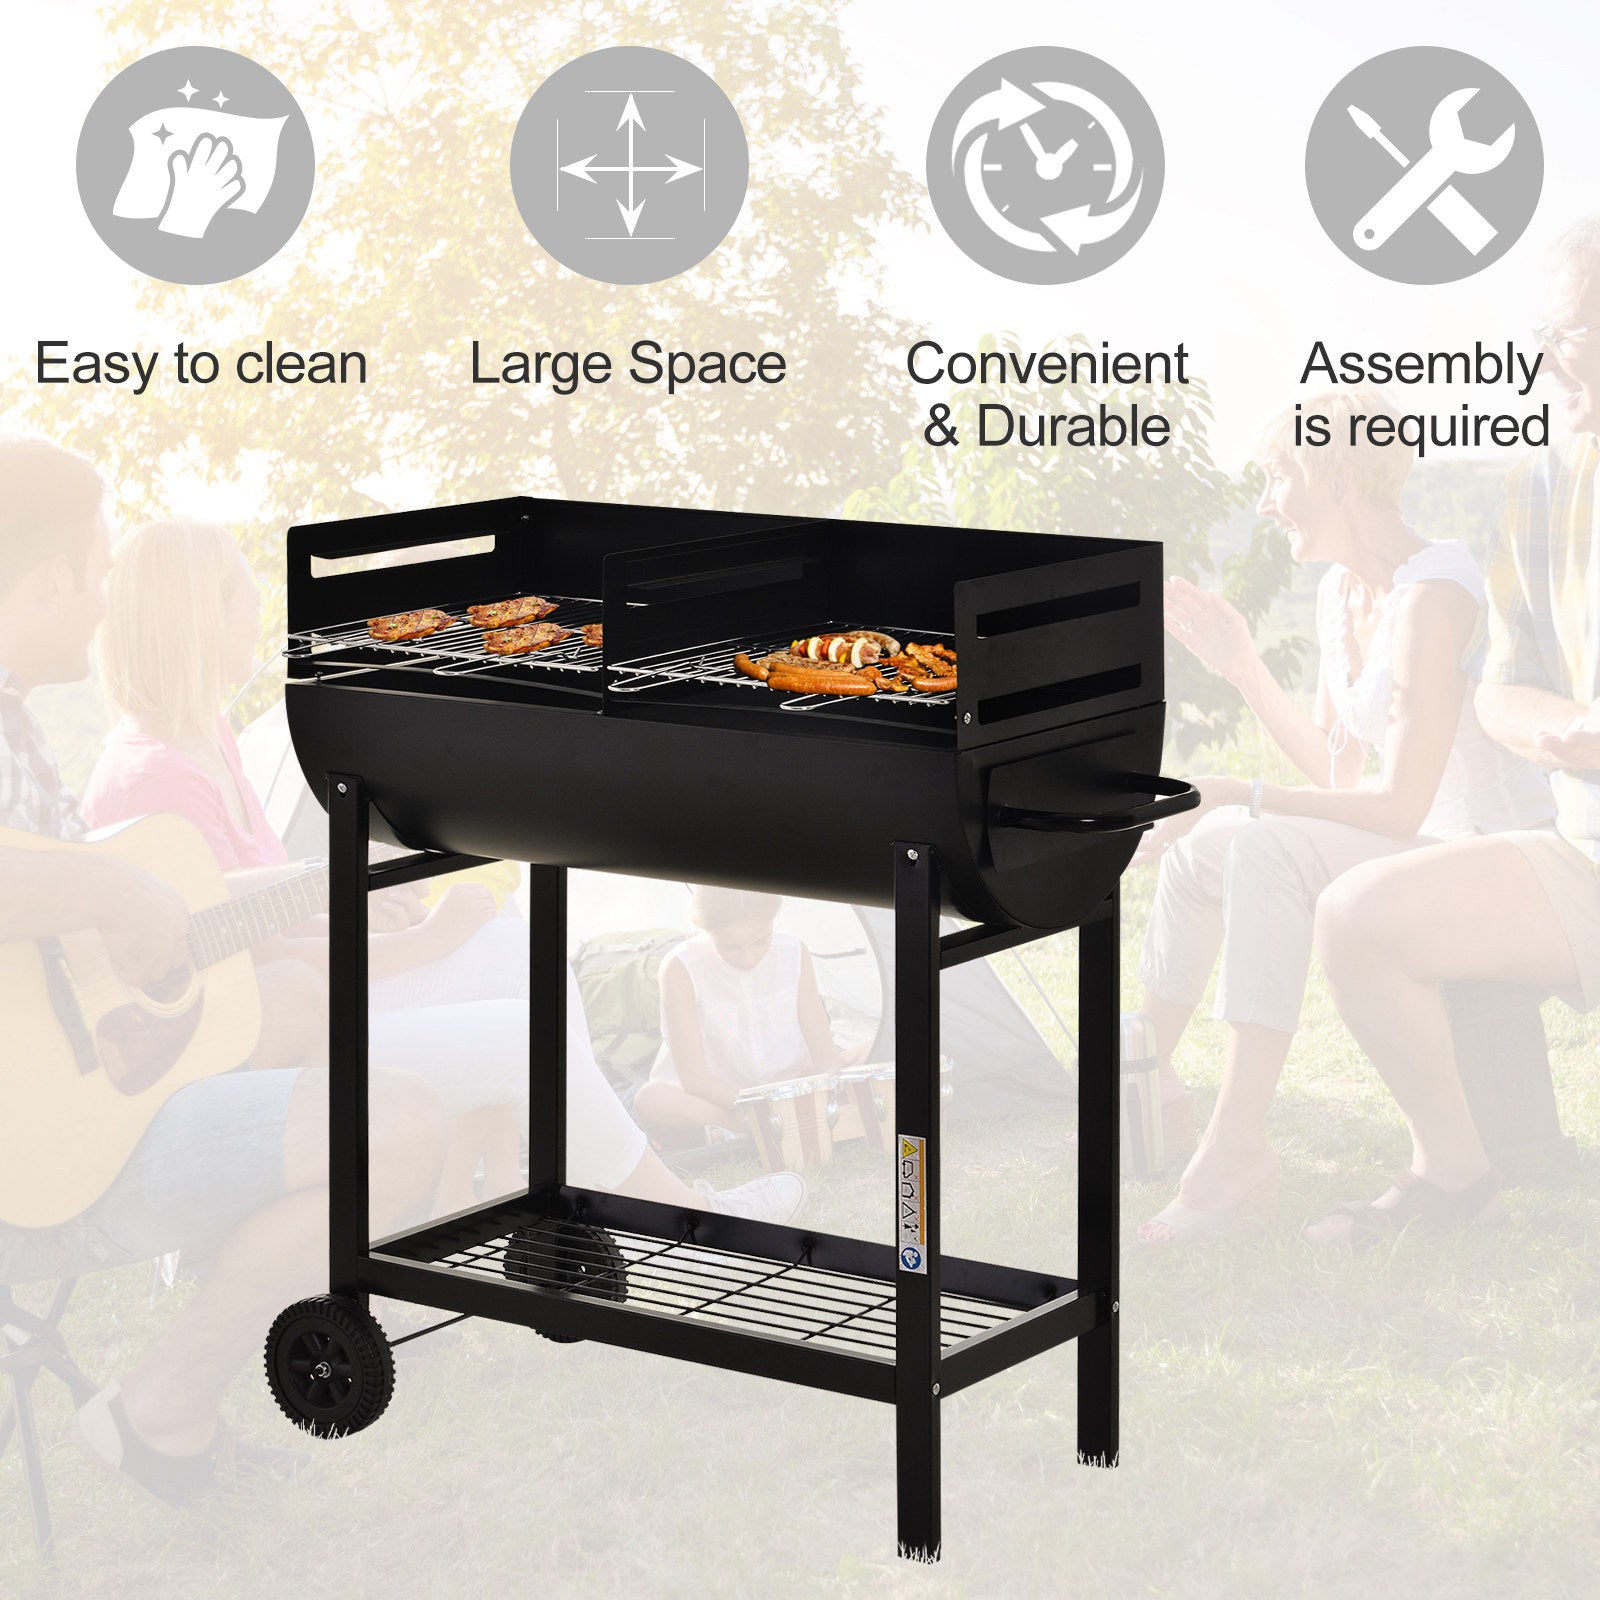 Outsunny Charcoal Barbecue Grill Garden BBQ Trolley w/ Dual Grill, Adjustable Grill Nets, Heat-resistant Steel, Wheels, Black